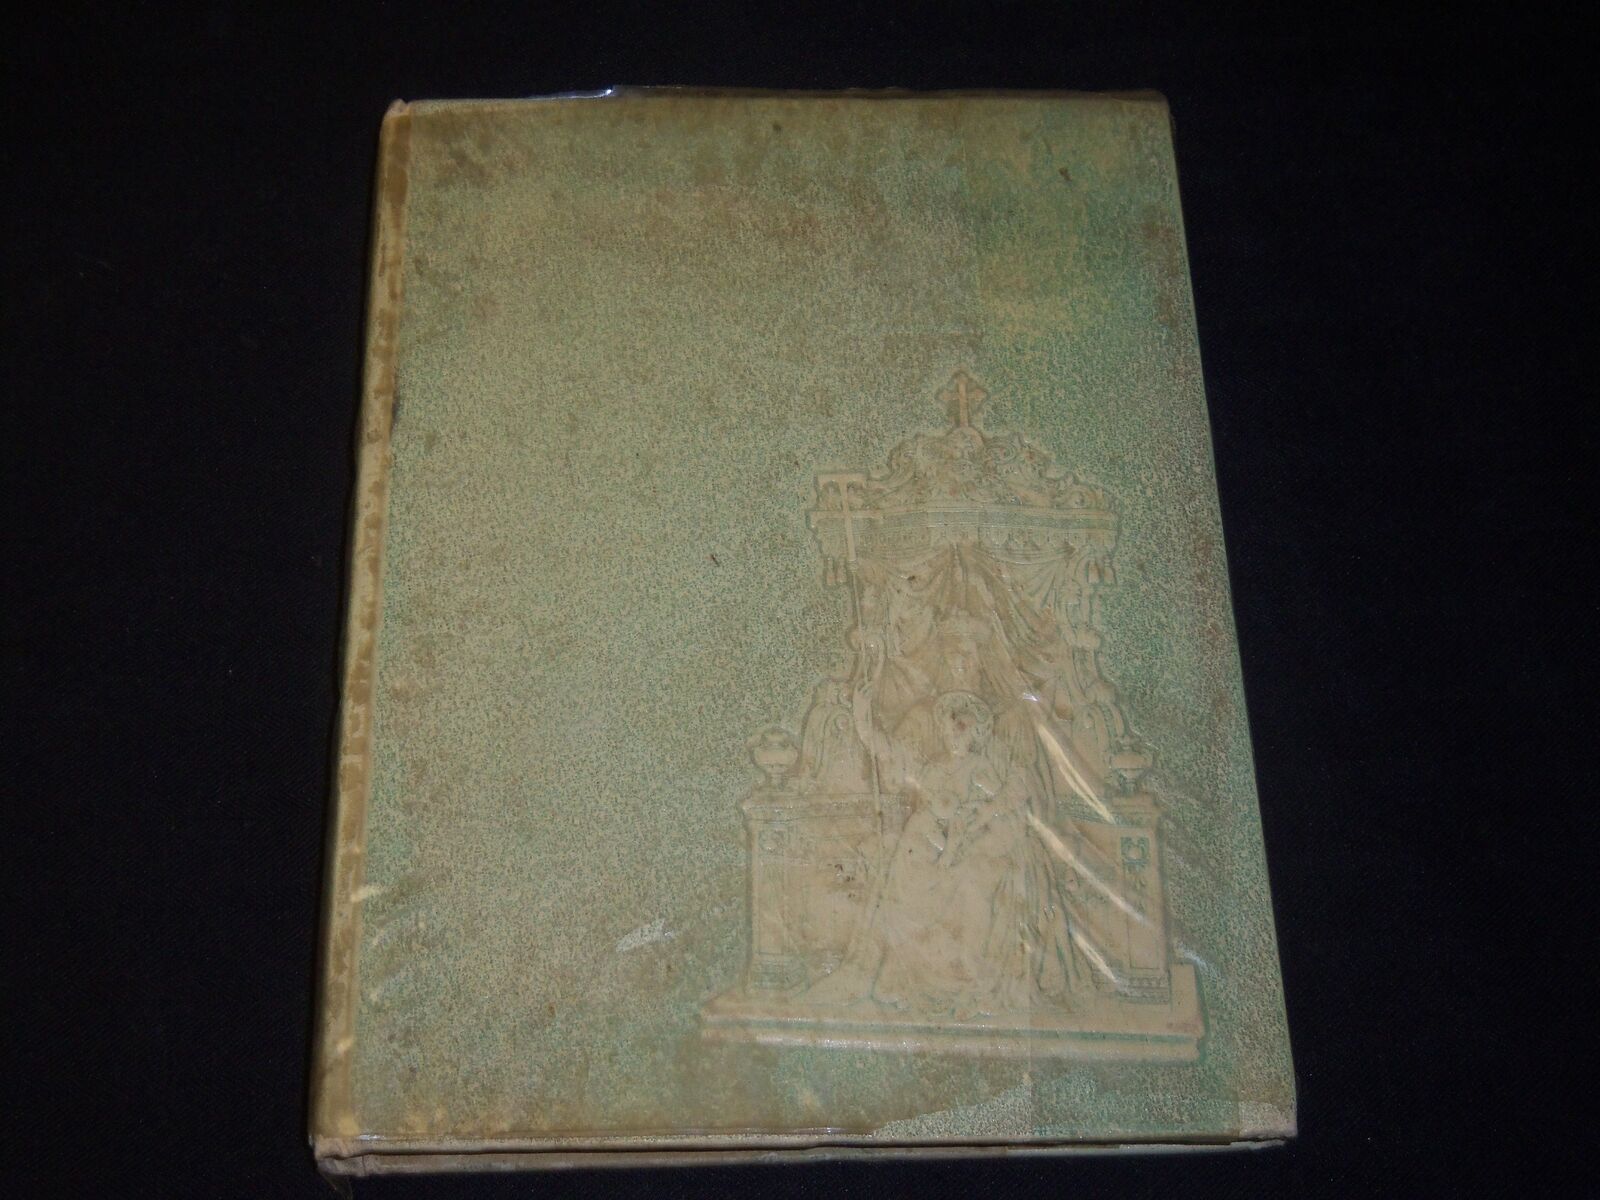 1964 CHIMES MOUNT SAINT MARY'S ACADEMY YEARBOOK - NEW JERSEY - YB 1924